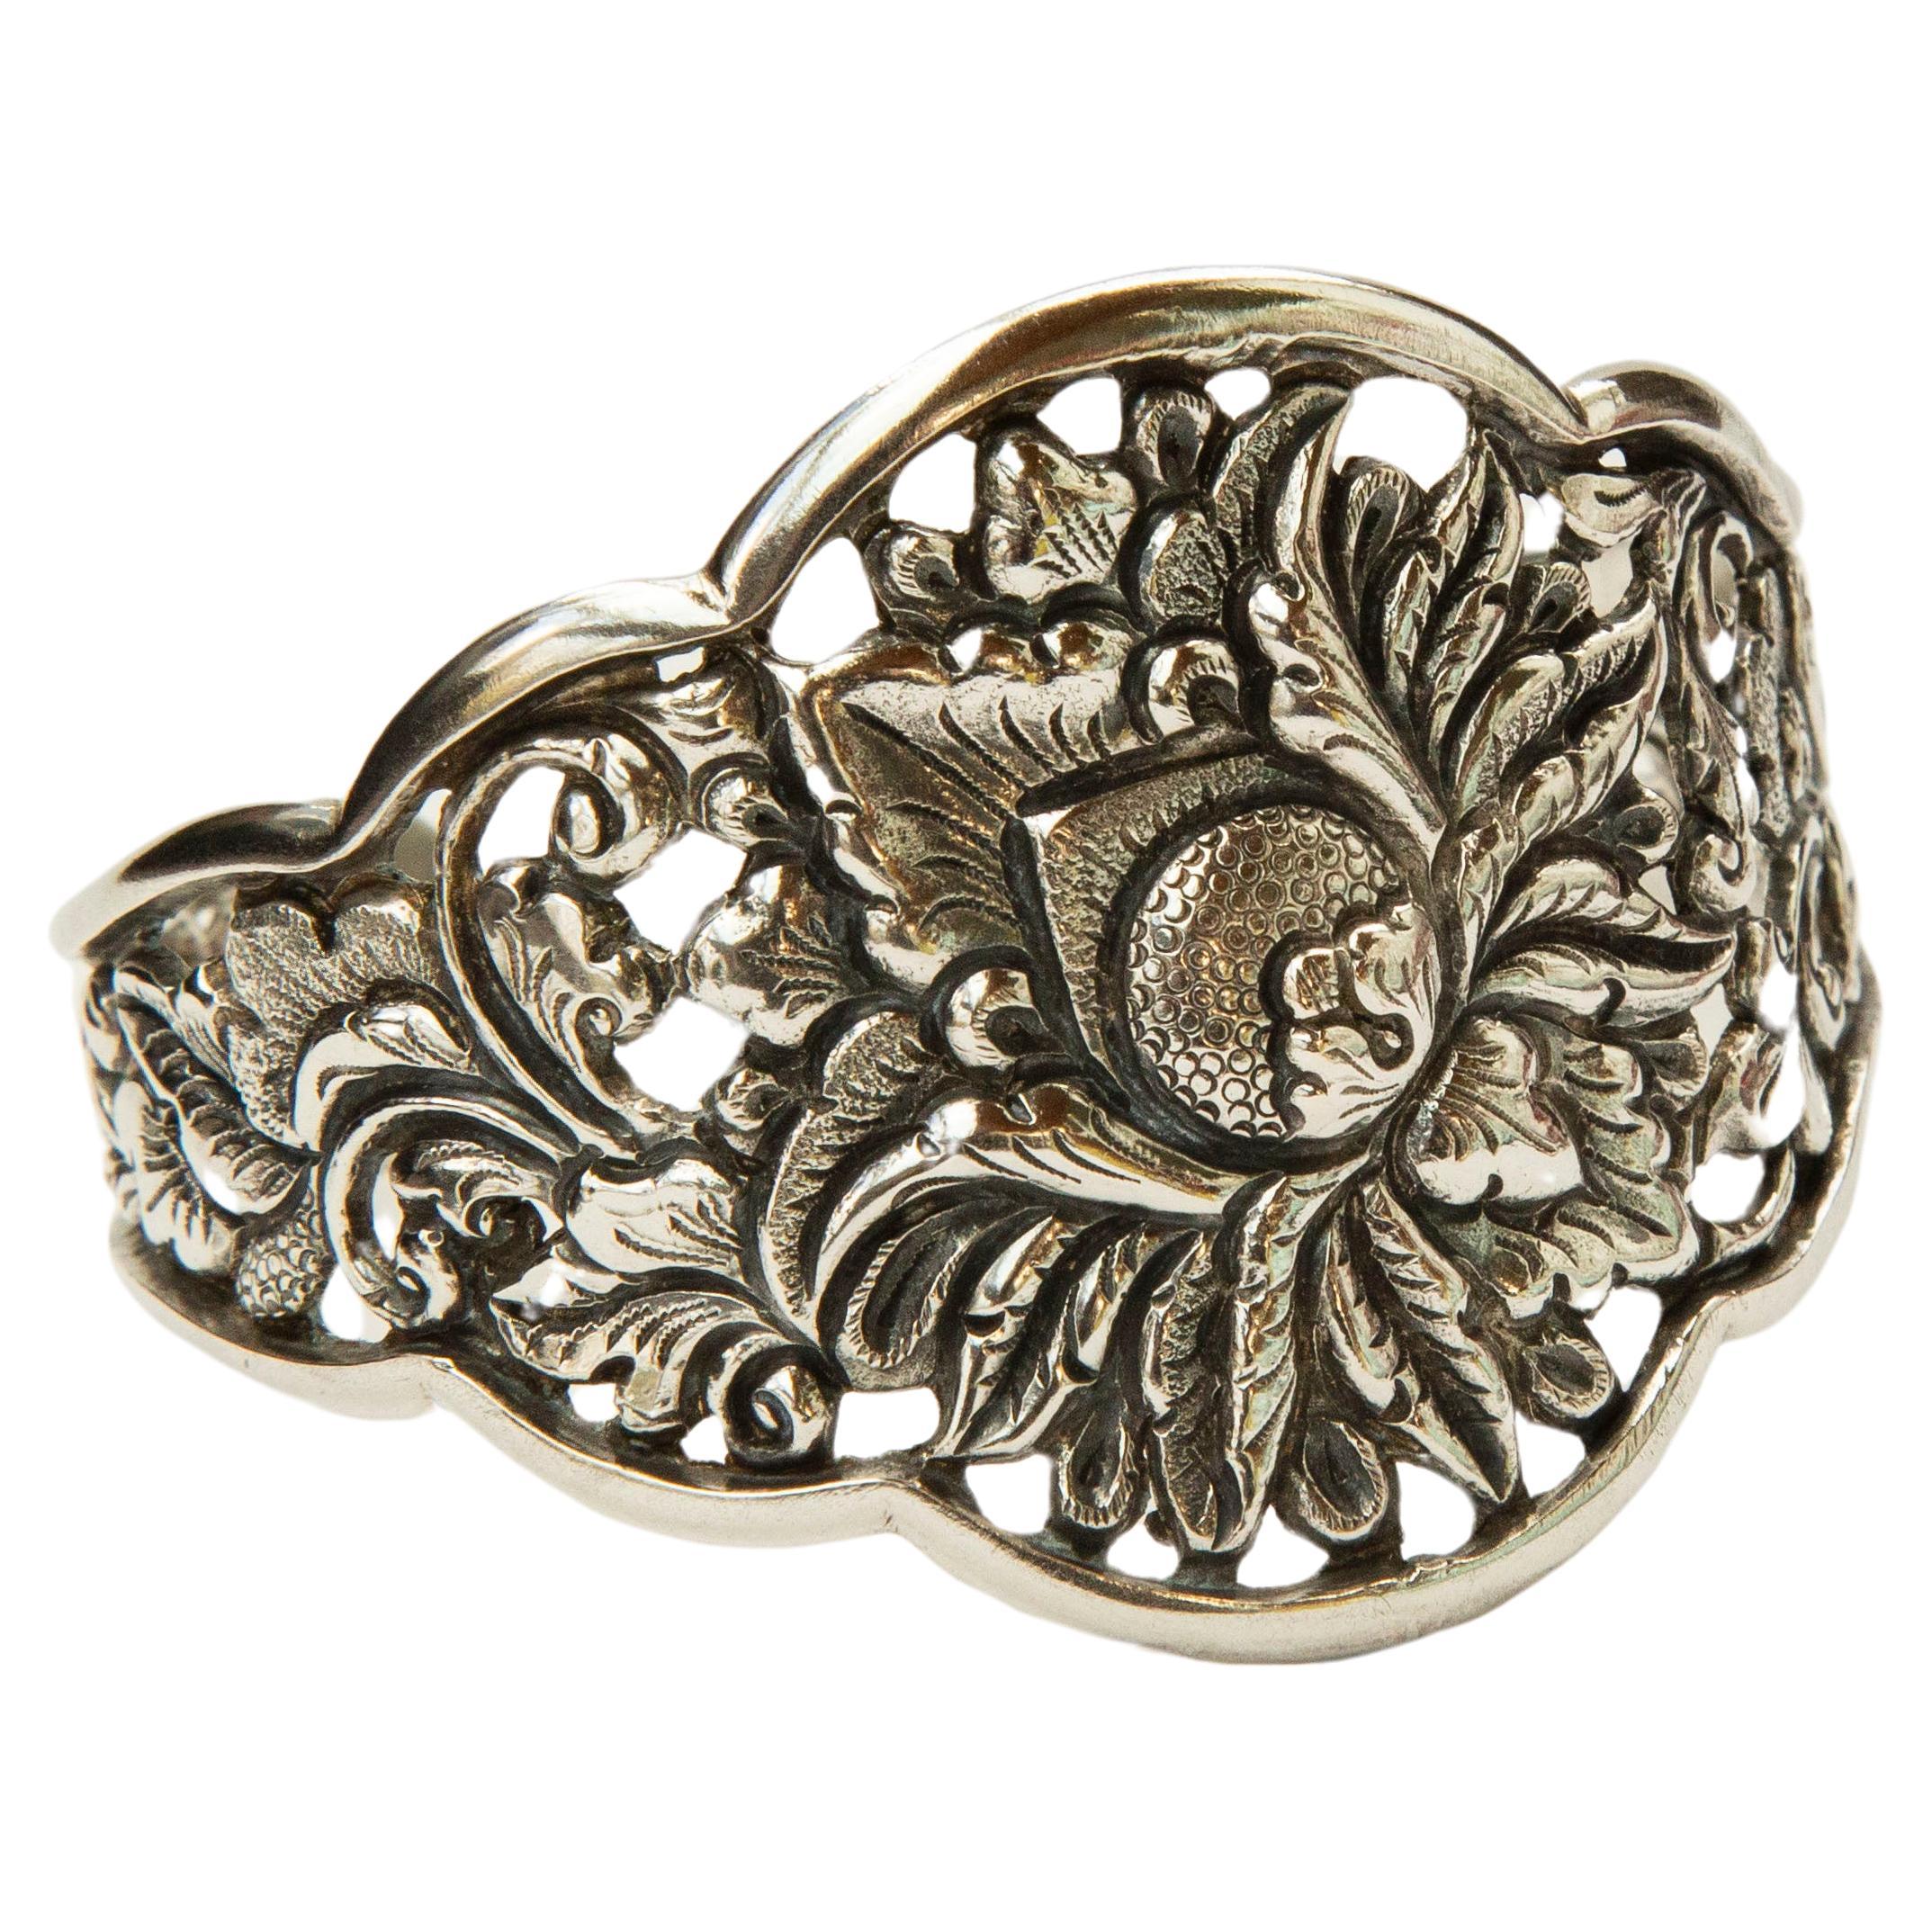 Vintage Indonesian Silver 800 Cuff Bracelet with Floral Decor CA. 1930s